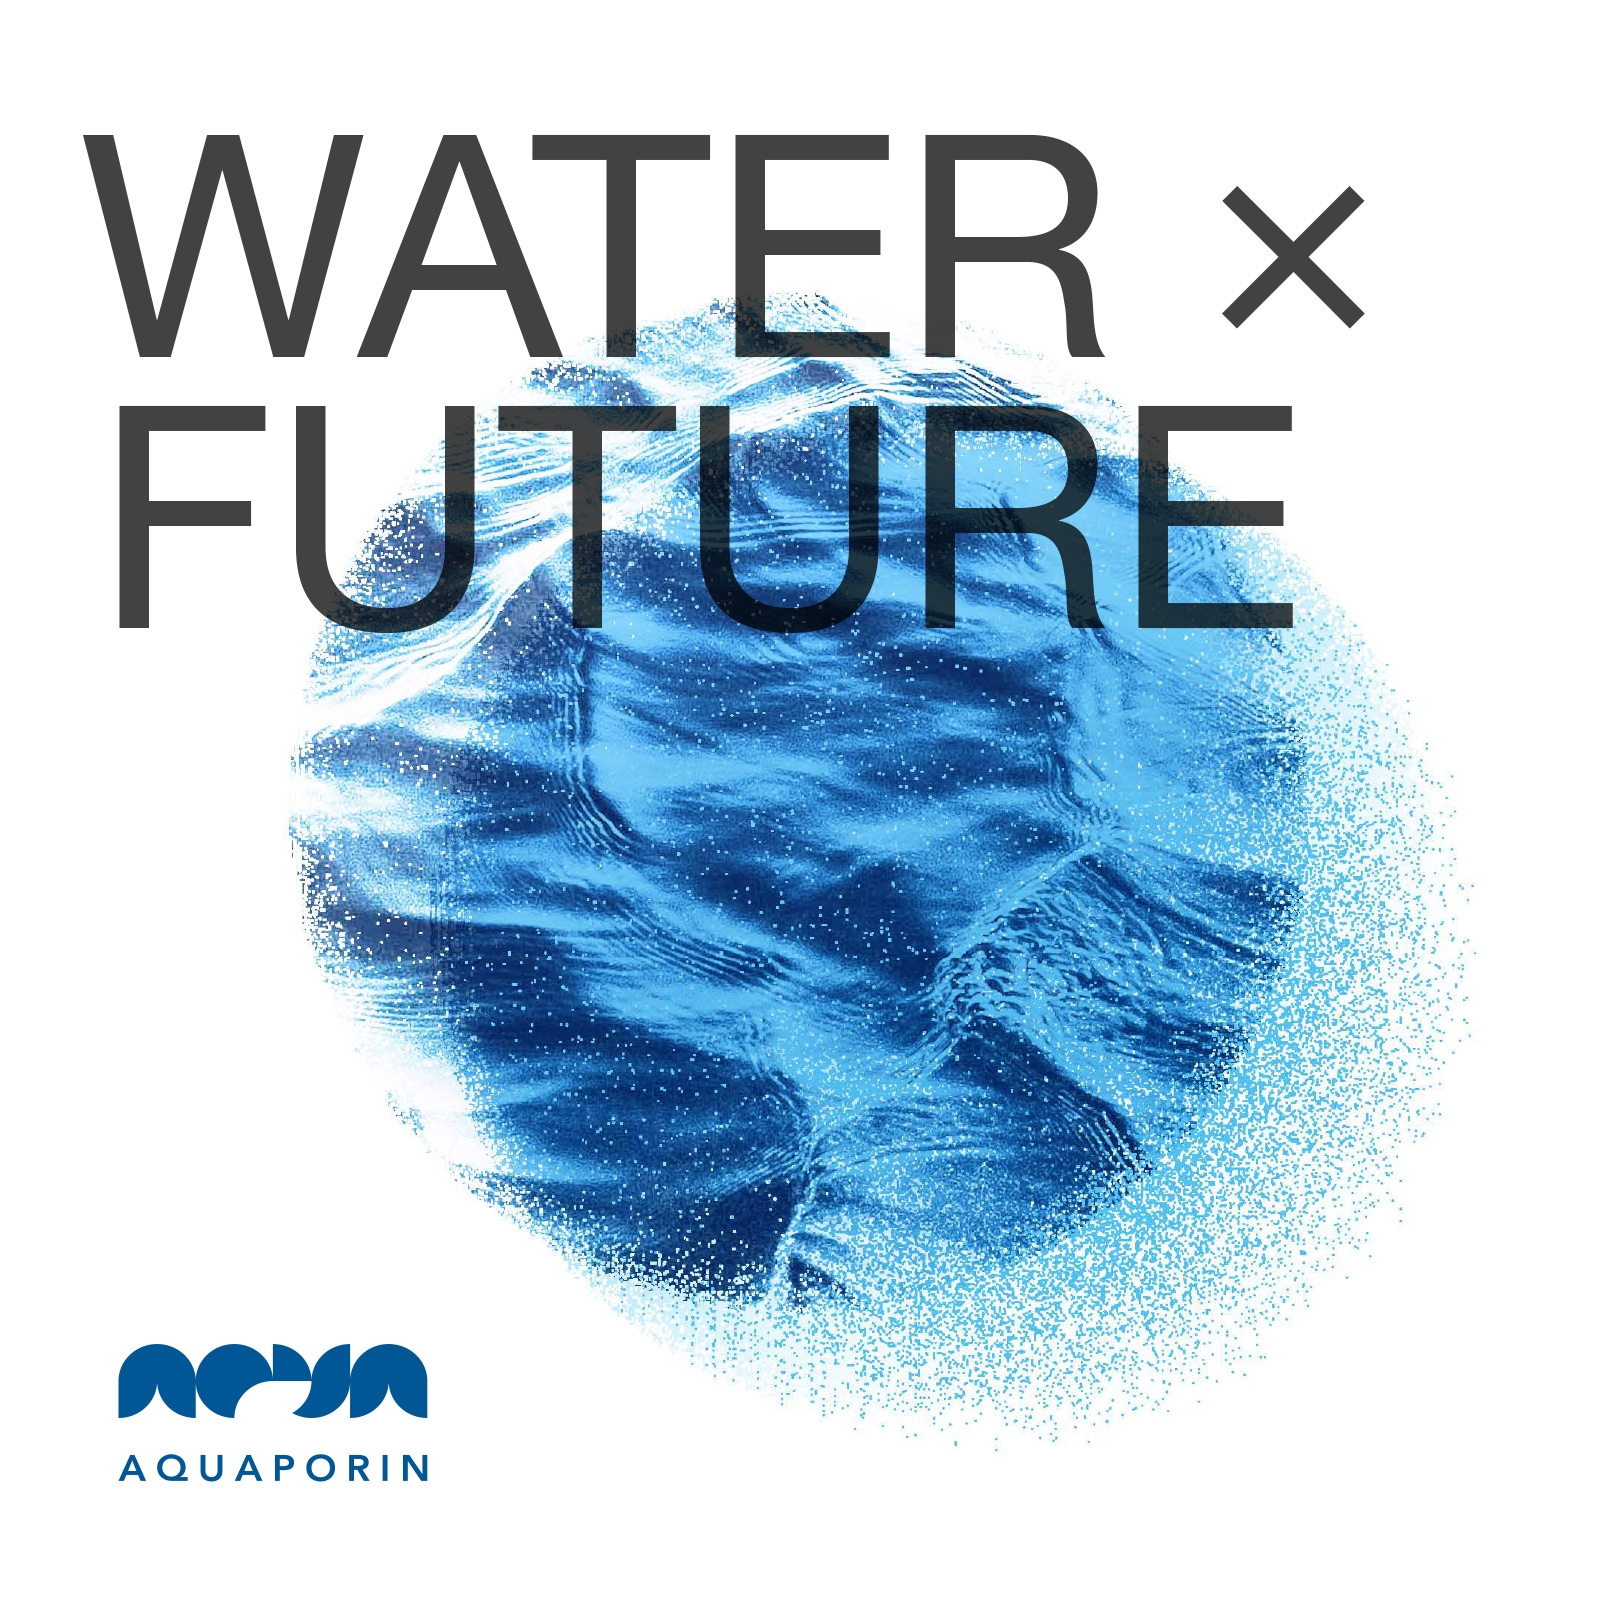 The first two podcasts cover the clean water crisis and possible new solutions and the link between bottled water consumption and plastic pollution.